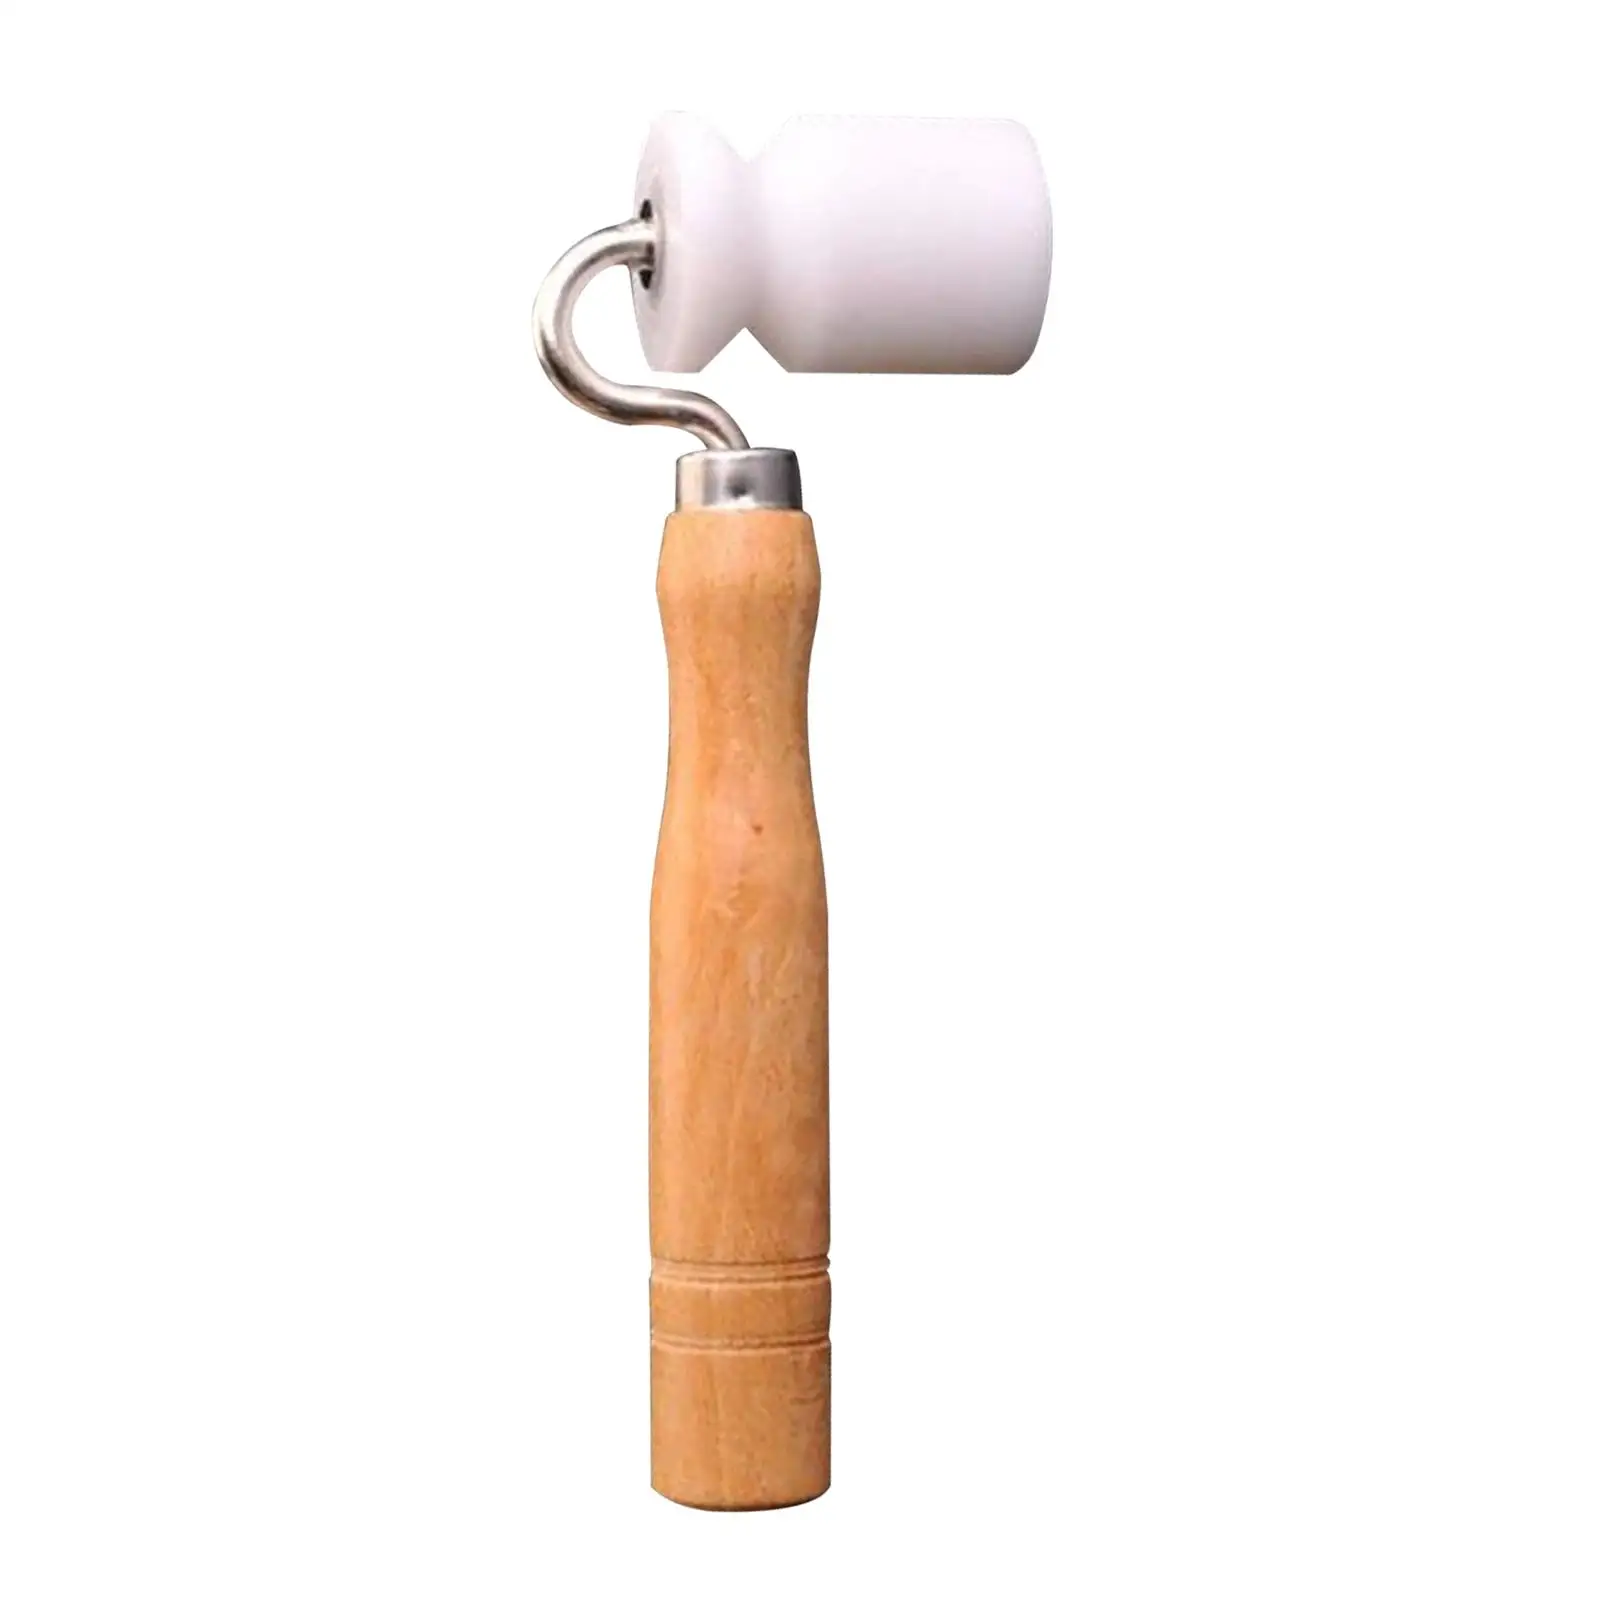 Wallpaper Seam Roller Ergonomic Decorating Roller Hand Pressure Roller for Most Kinds Wall Papers Home Decor Edge Roller